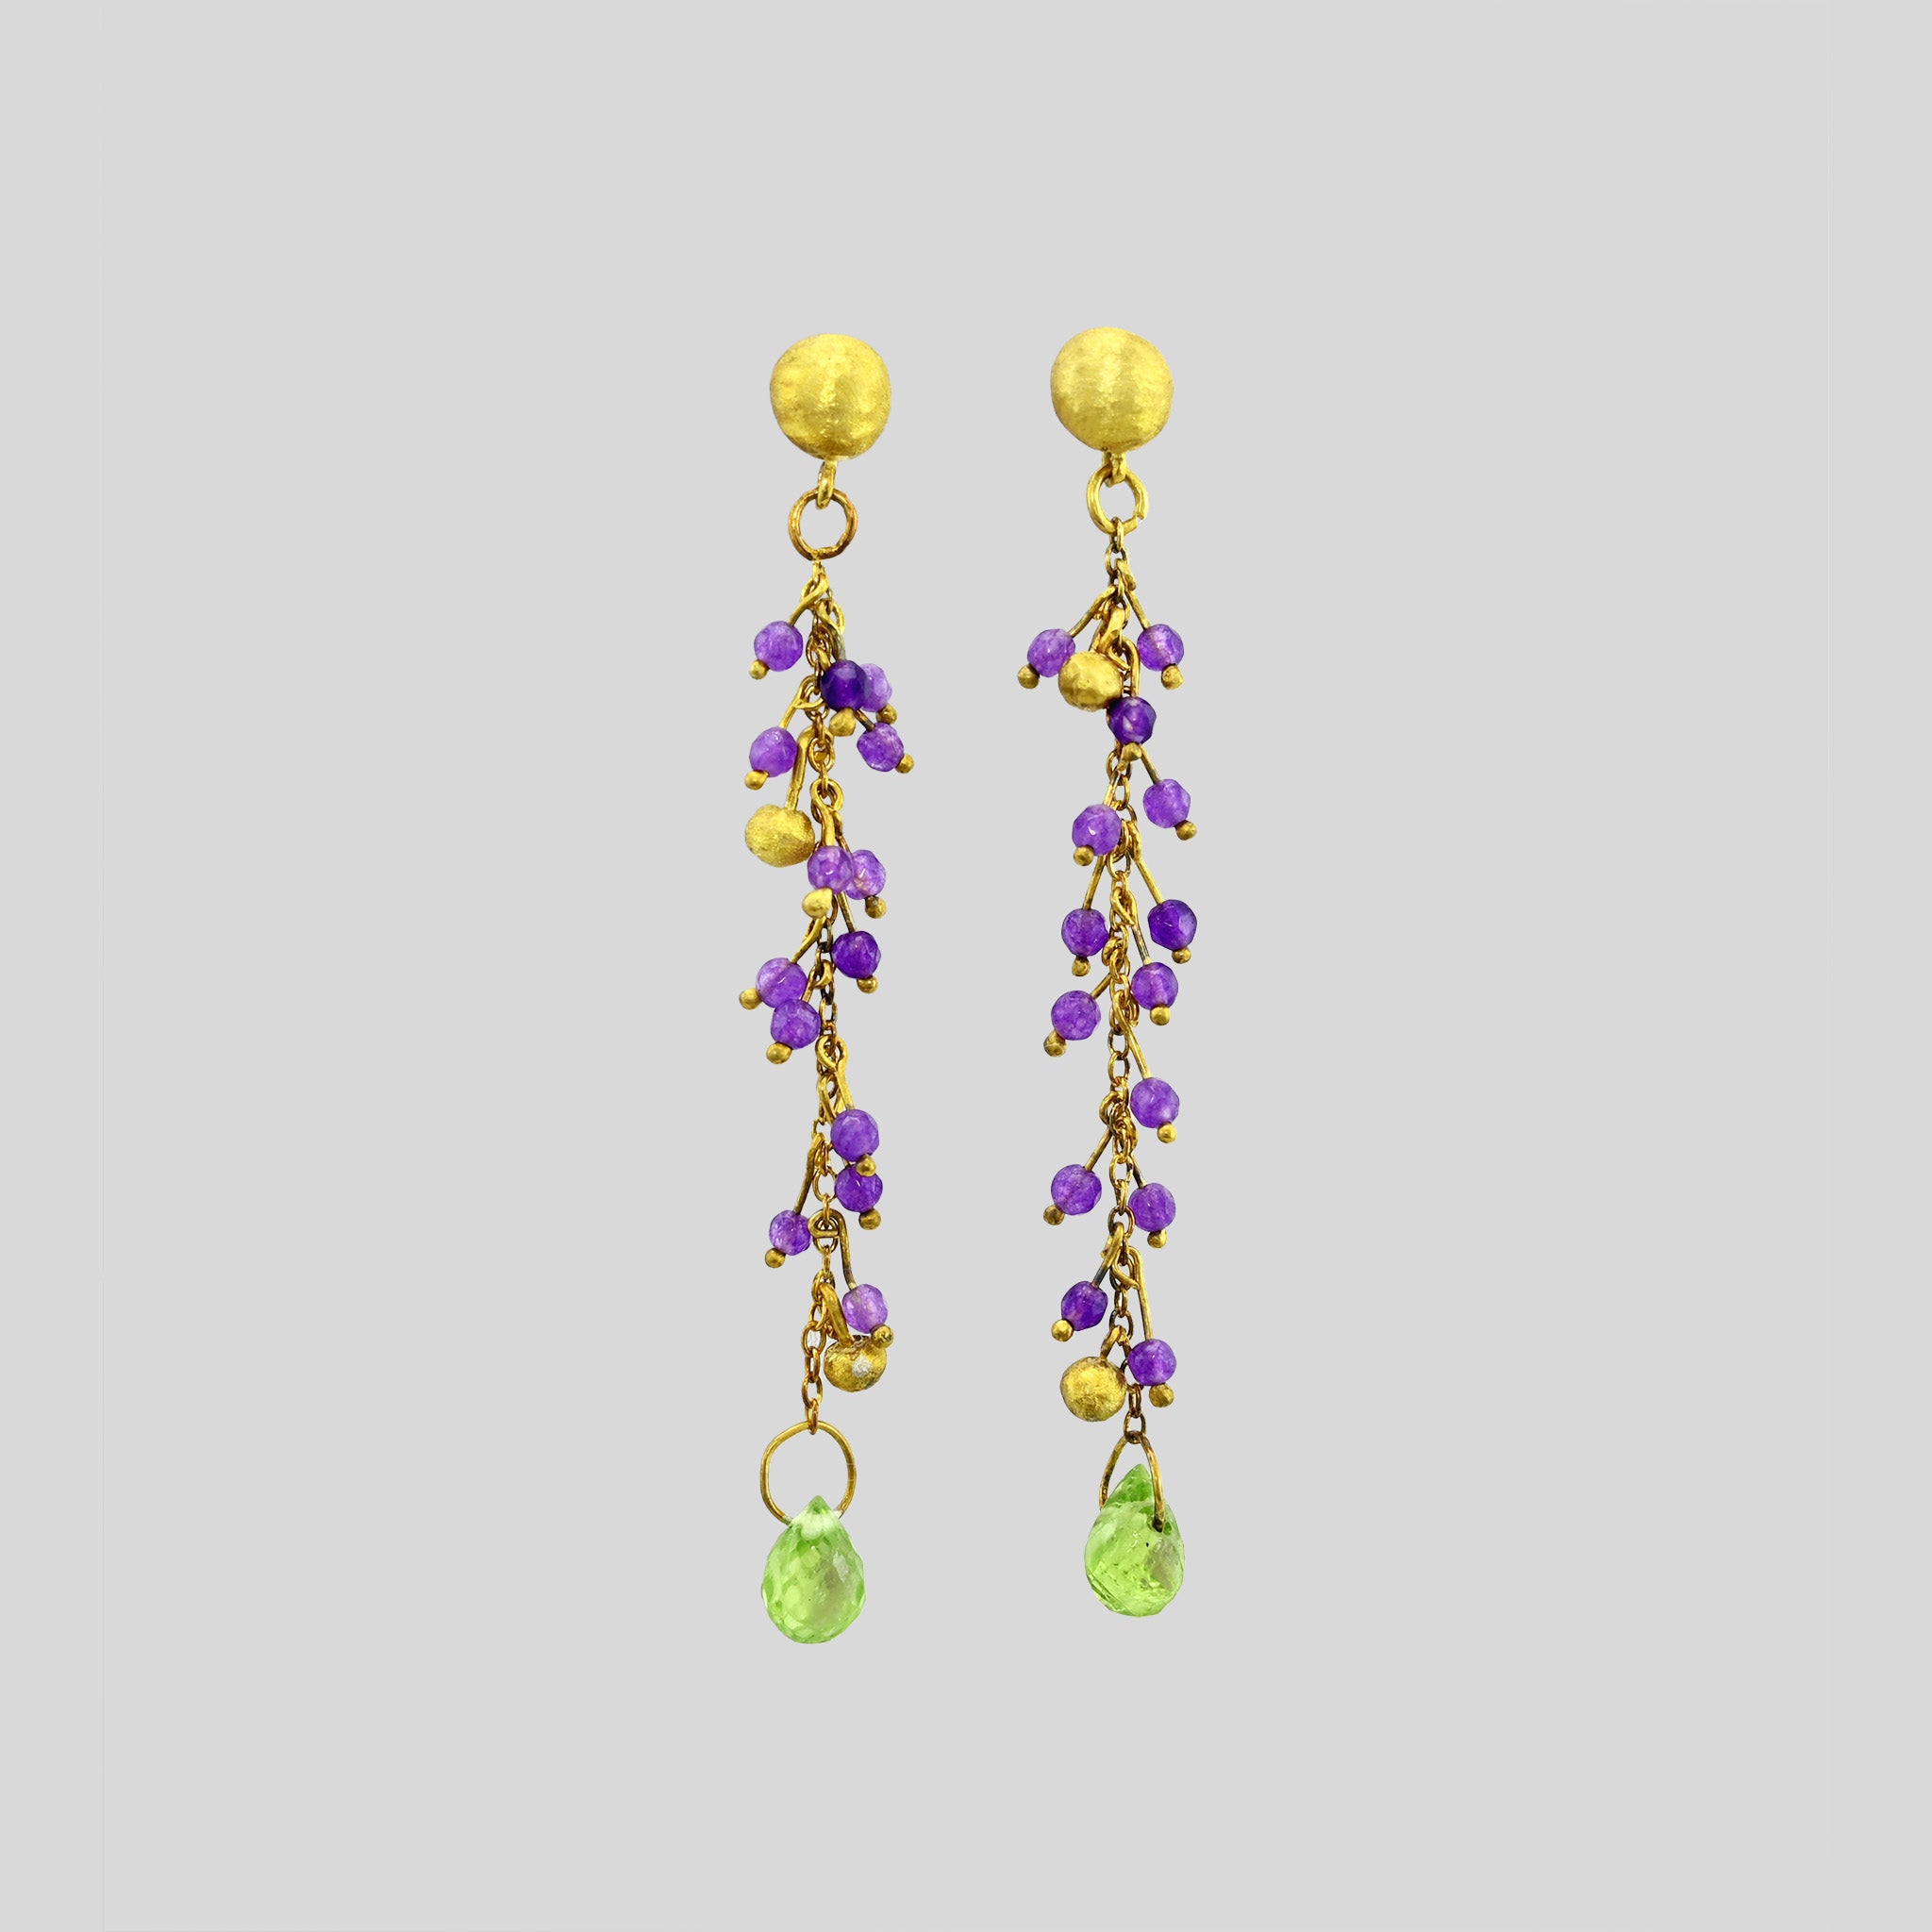 close up of Venus Gold Stud Earrings with Amethyst Beads & Drop-Shaped Peridot - Elegant Half Cap and Gold Threads Design.